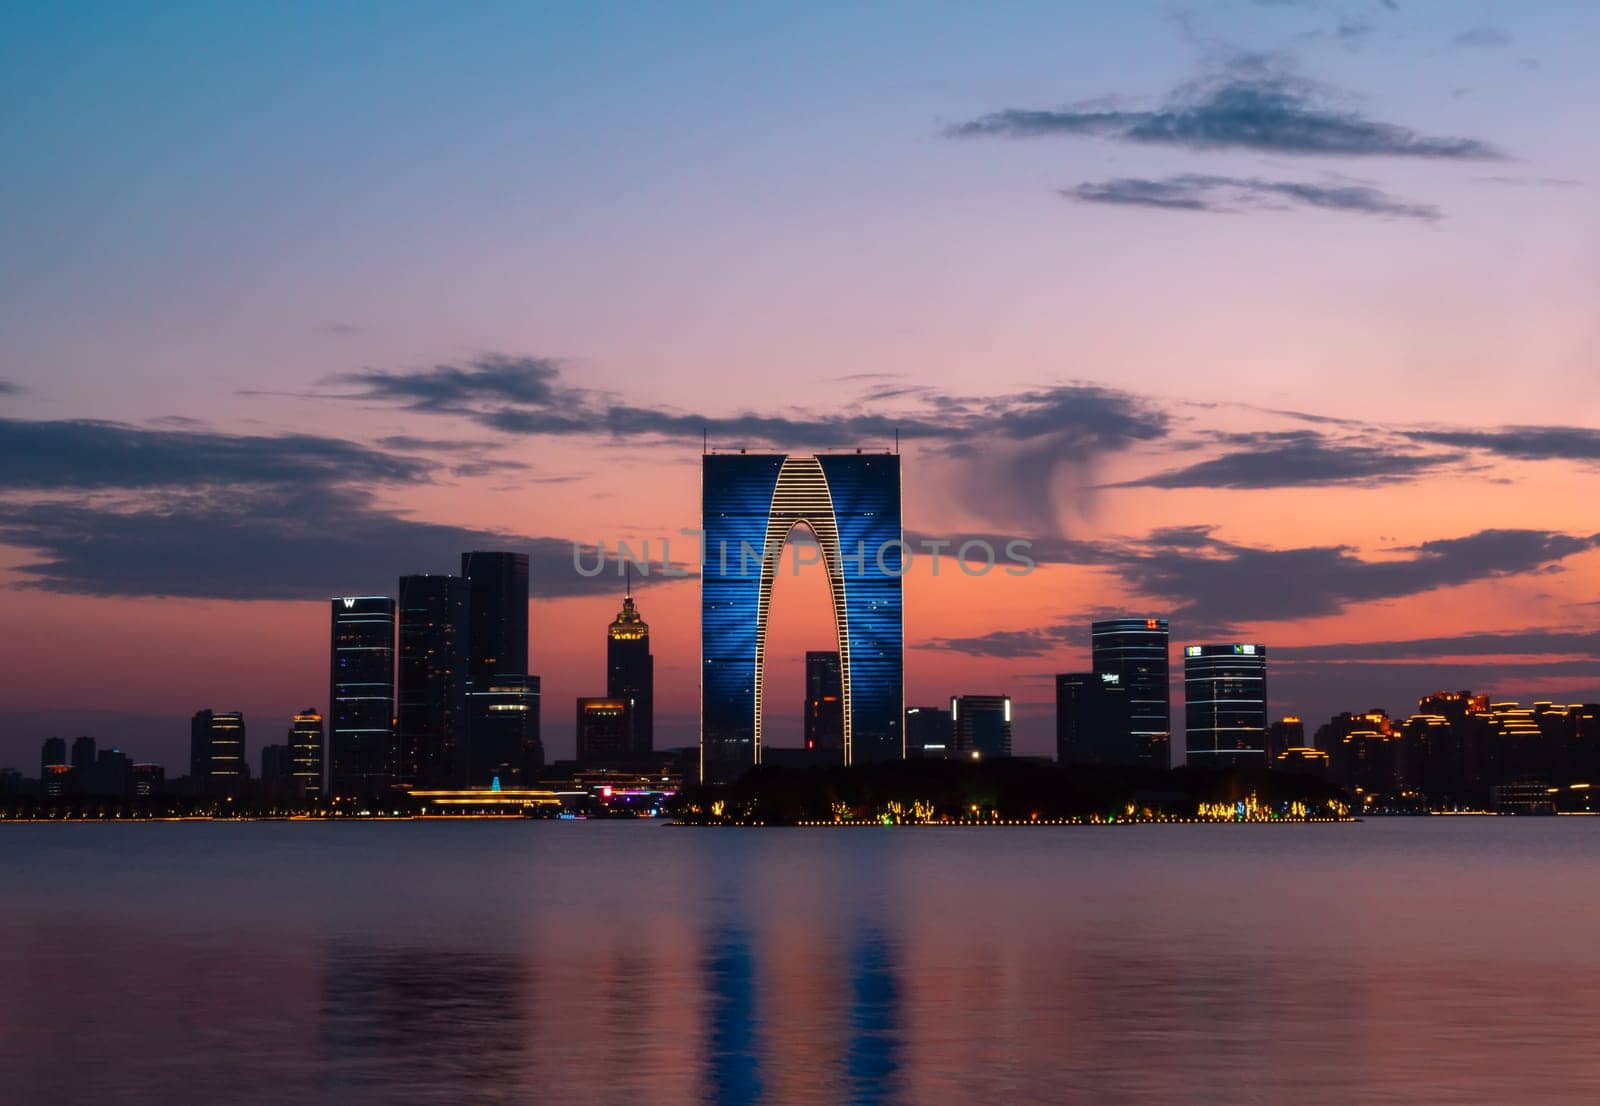 The Gate of the Orient, a distinctive skyscraper in Suzhou, China, is illuminated against the evening sky as it overlooks a calm lake. Surrounding buildings and city lights reflect on the water, creating a picturesque urban scene.